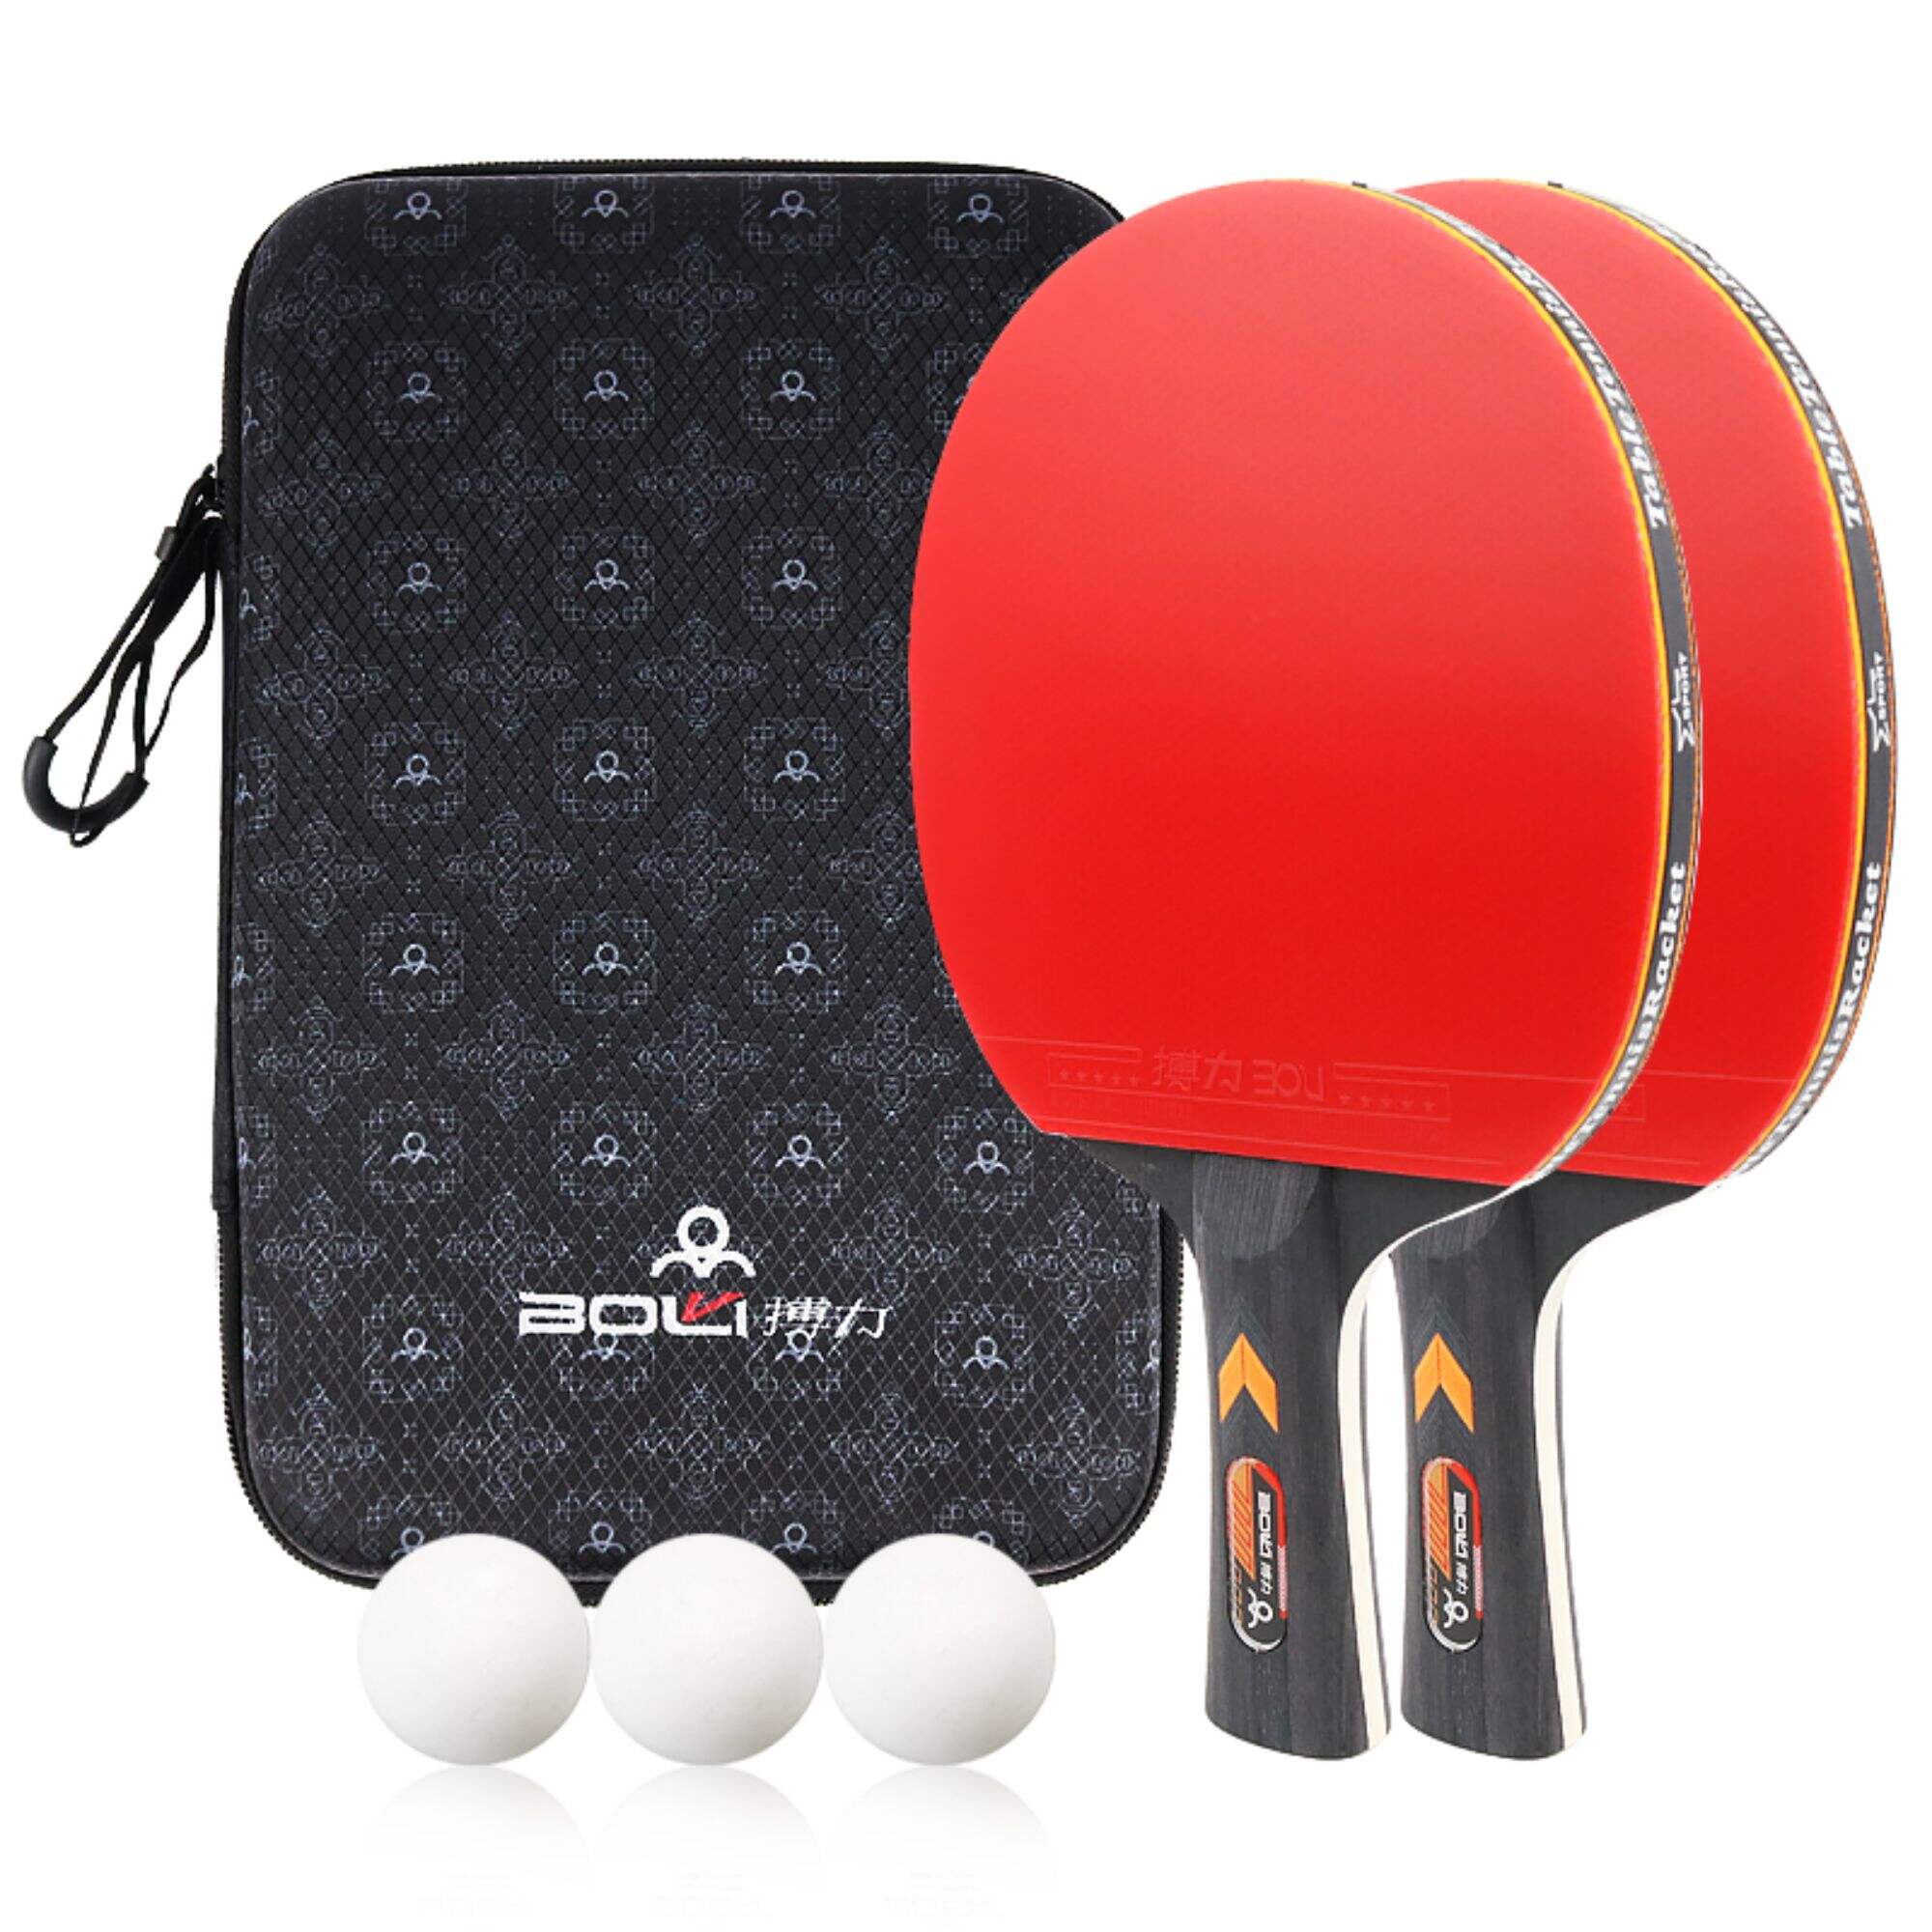 F01 Portable Table Tennis Racket Sets With 2 Paddles And 3 Balls